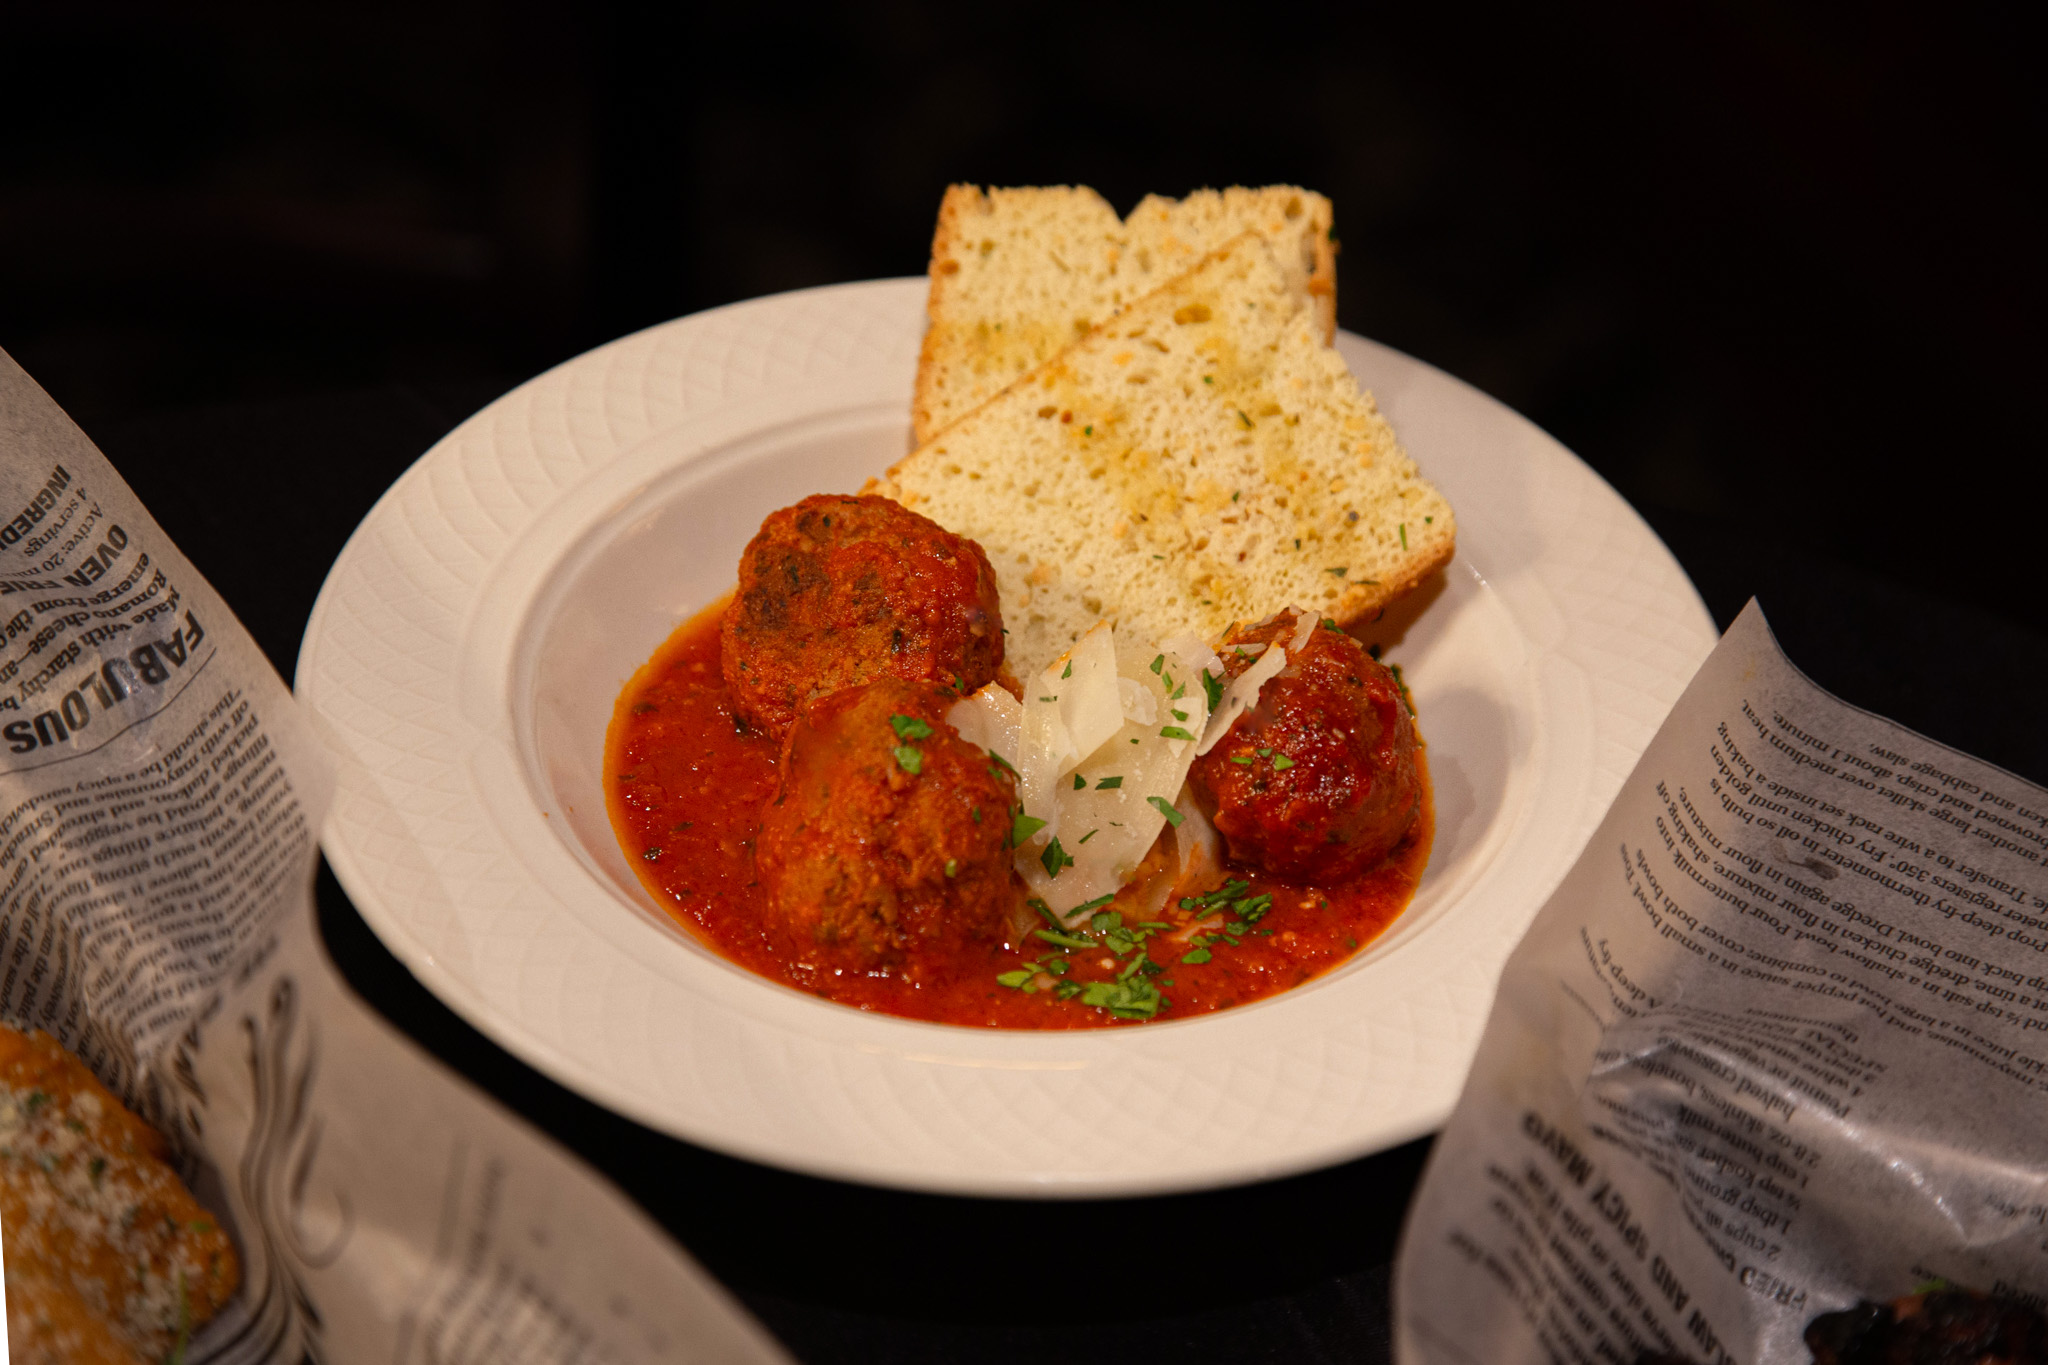 Bowl of meatballs, red sauce, and bread.